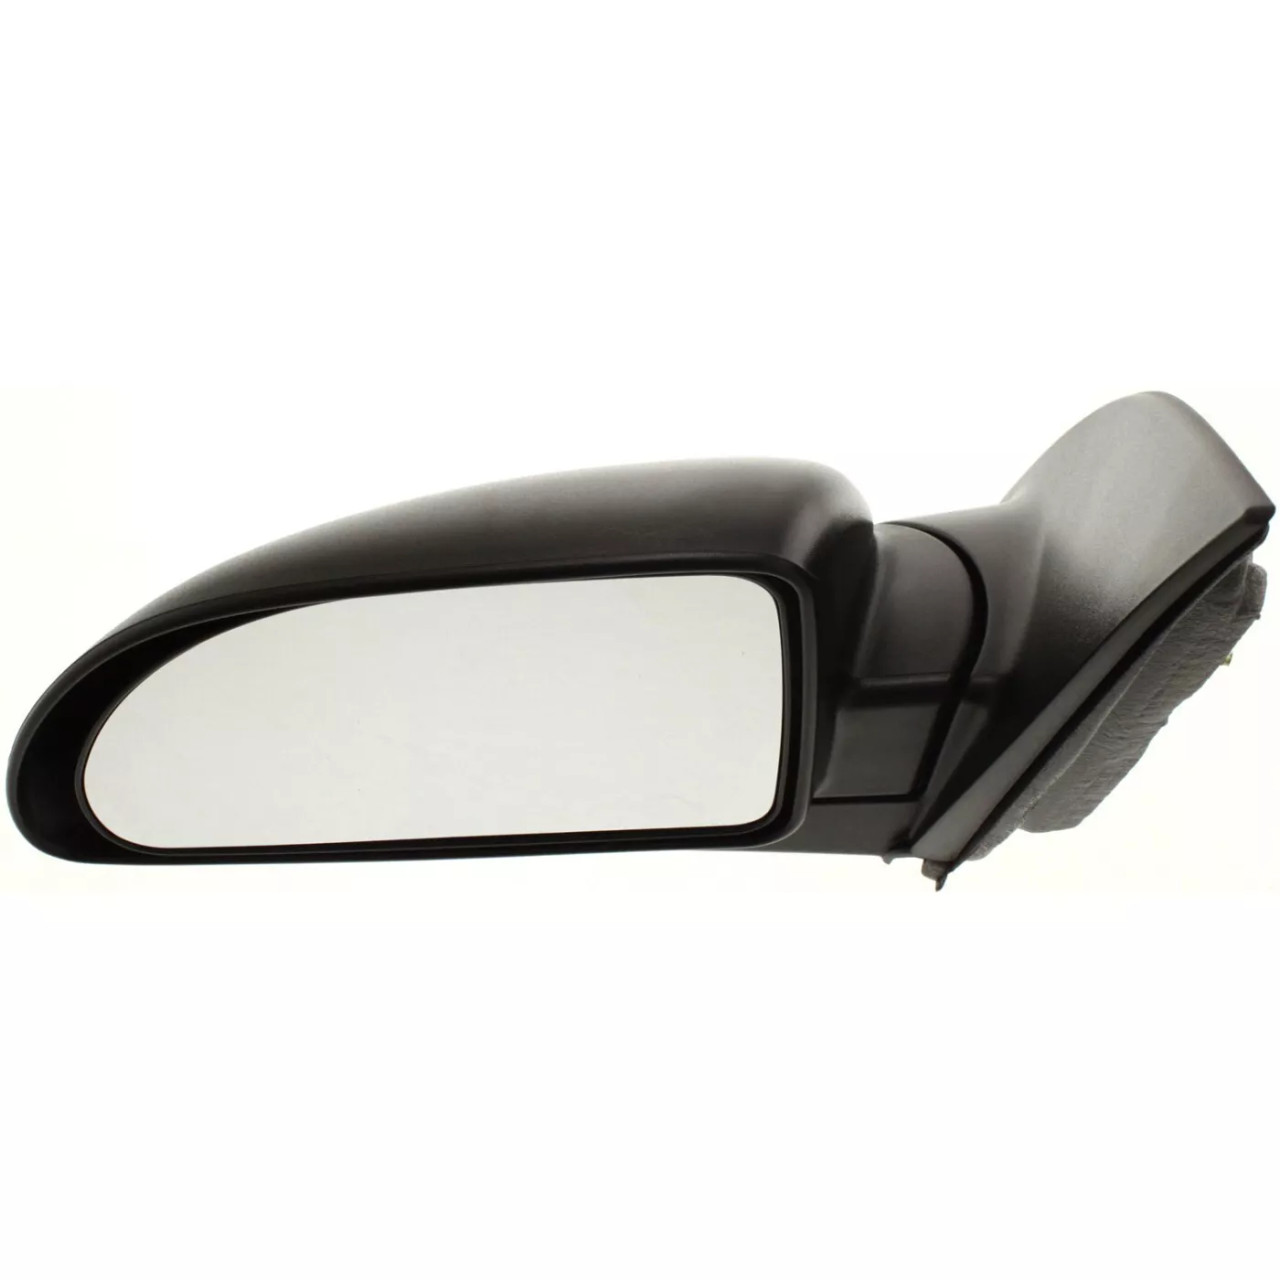 Manual Mirror For 2002-2007 Saturn Vue Driver Side Paint To Match